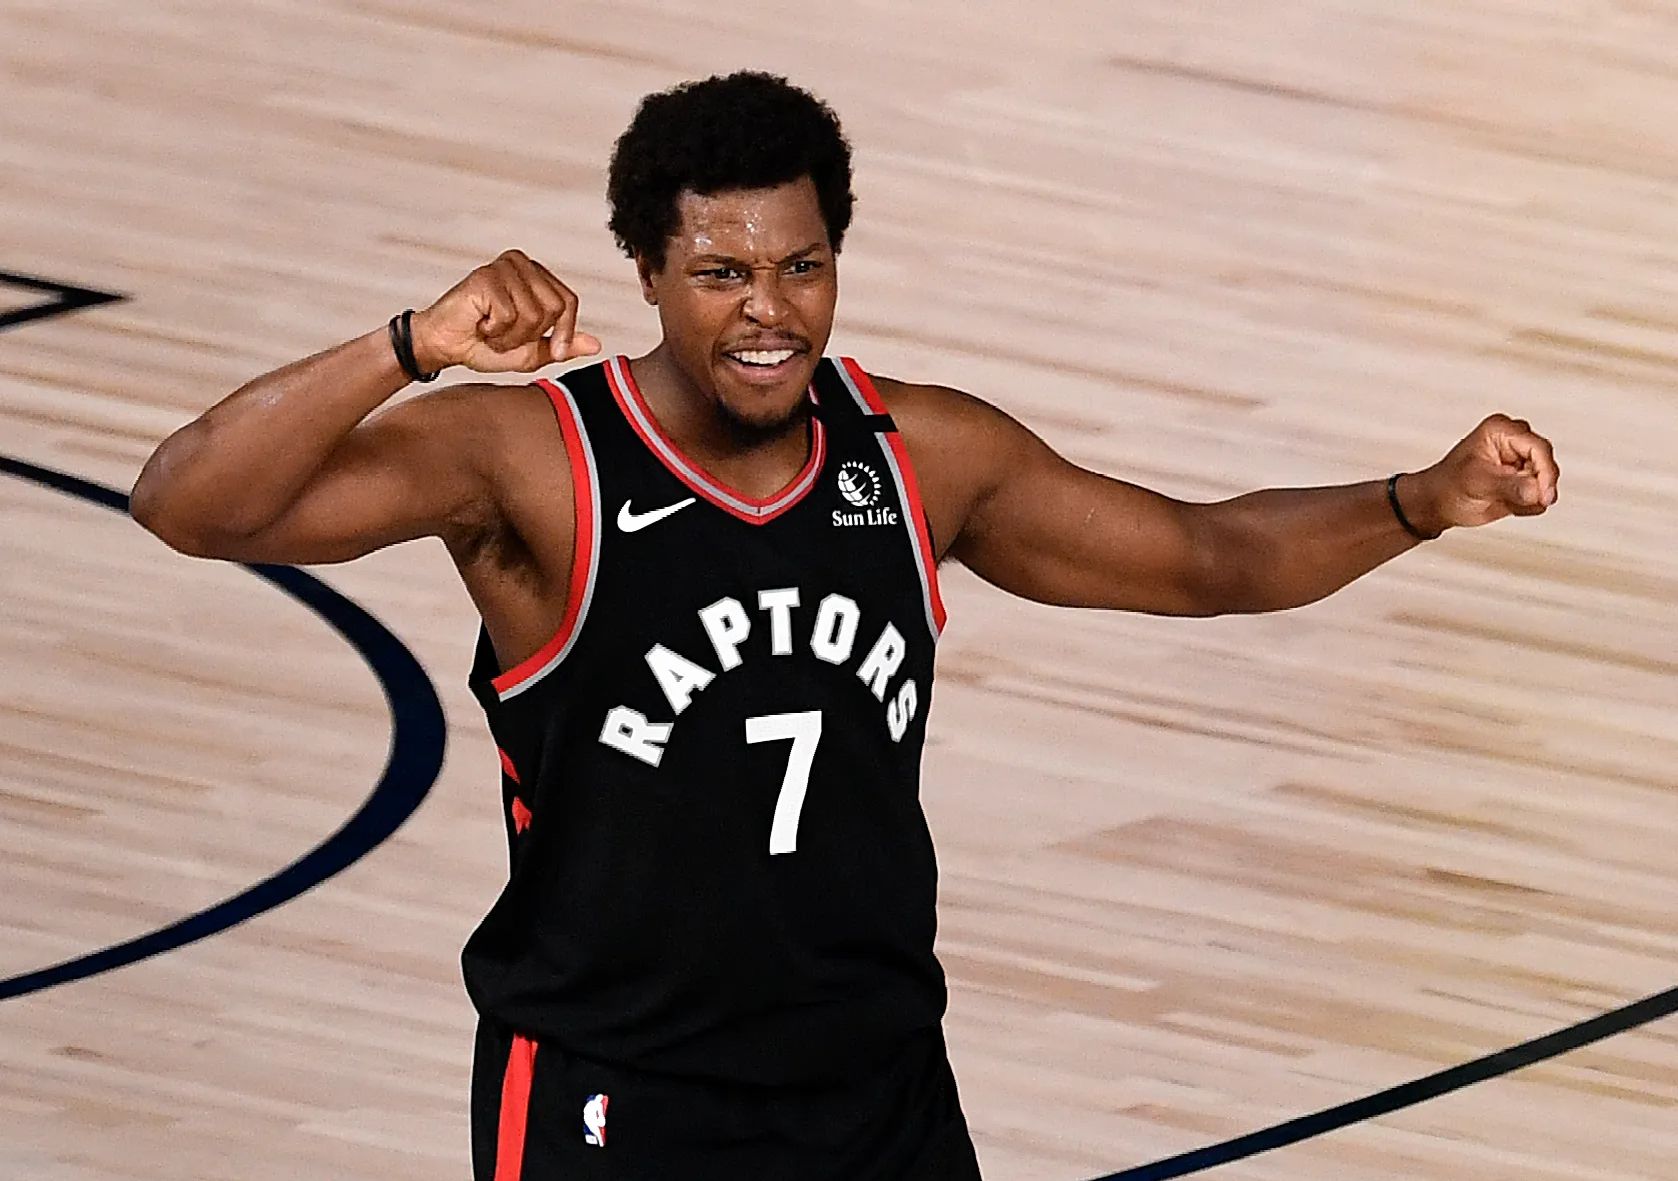 Kyle Lowry reacts to a play.